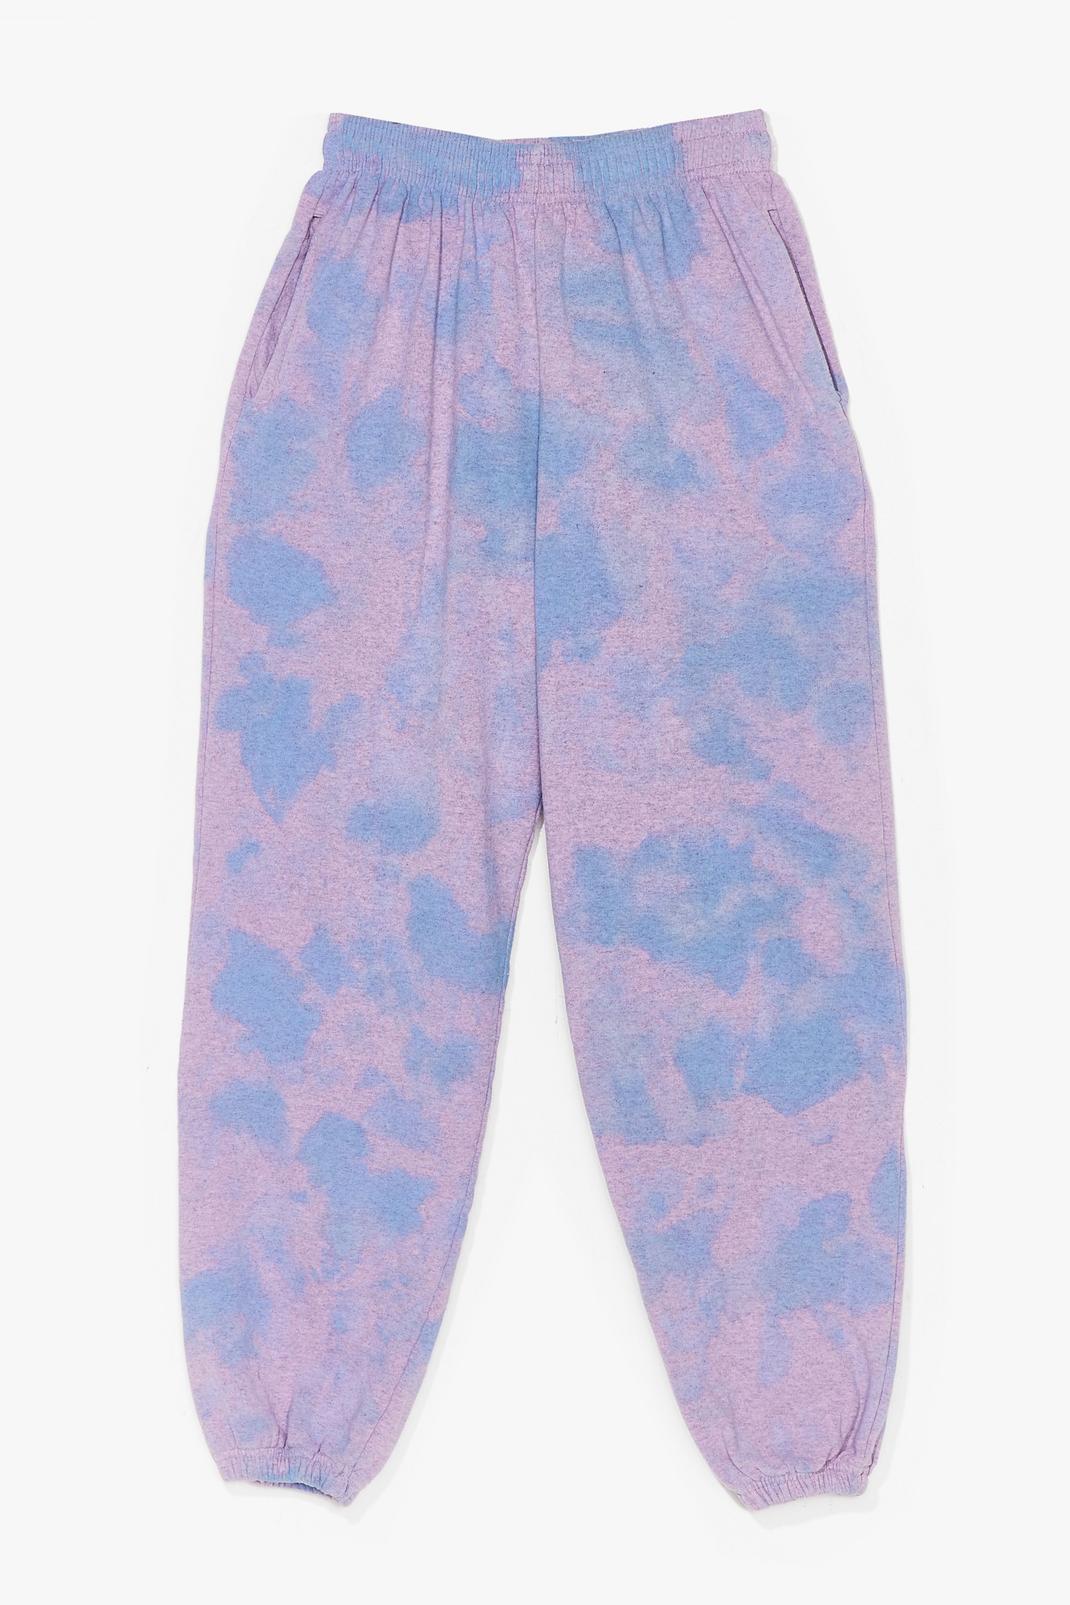 Purple Head in the Clouds High-Waisted Tie Dye Tracksuit Pants image number 1